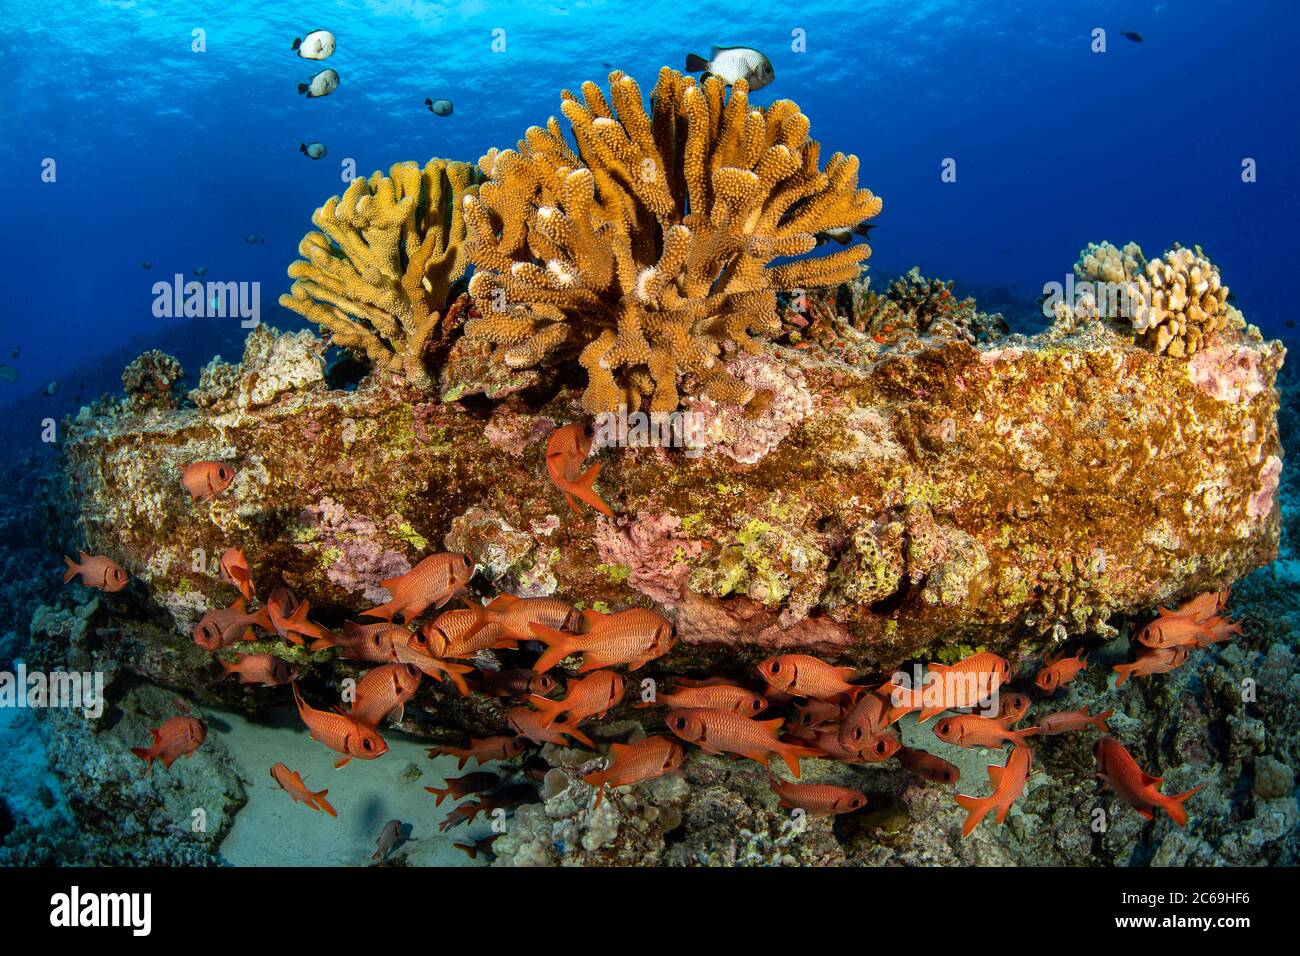 A school of shoulderbar soldierfish, Myripristis kuntee, stick close to the shadows during the day, Hawaii. Stock Photo